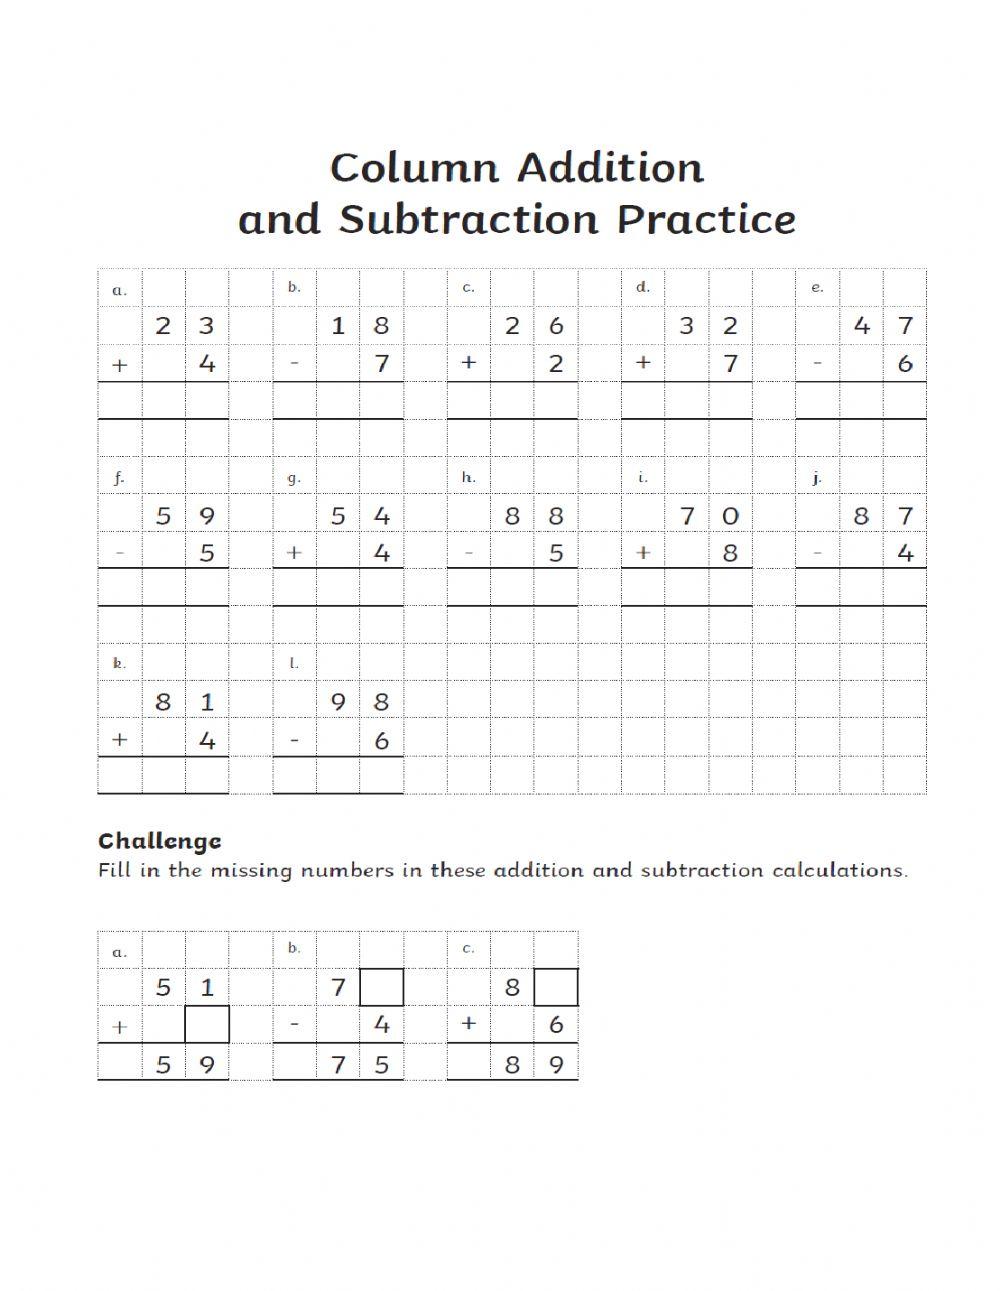 Addition and subtraction problems